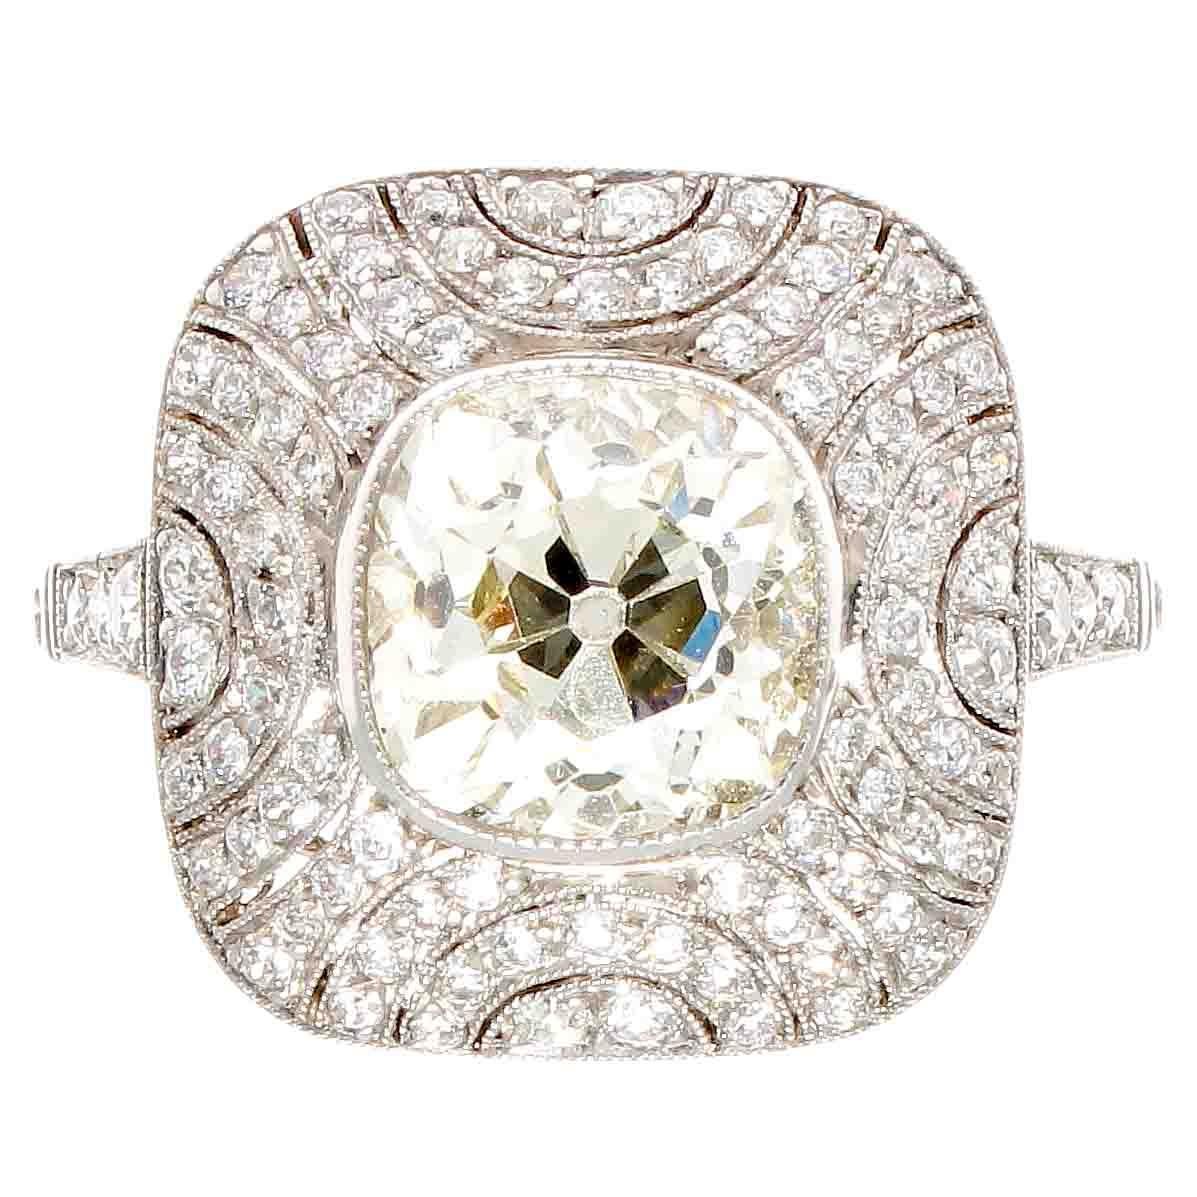 An original old mine cut diamond from the 1920’s. The well cut diamond is set in a modern art deco inspired ring. The diamond weighs 2.40 carats and is M color, VS1 clarity. Hand crafted in platinum featuring numerous near colorless diamonds. 
Ring